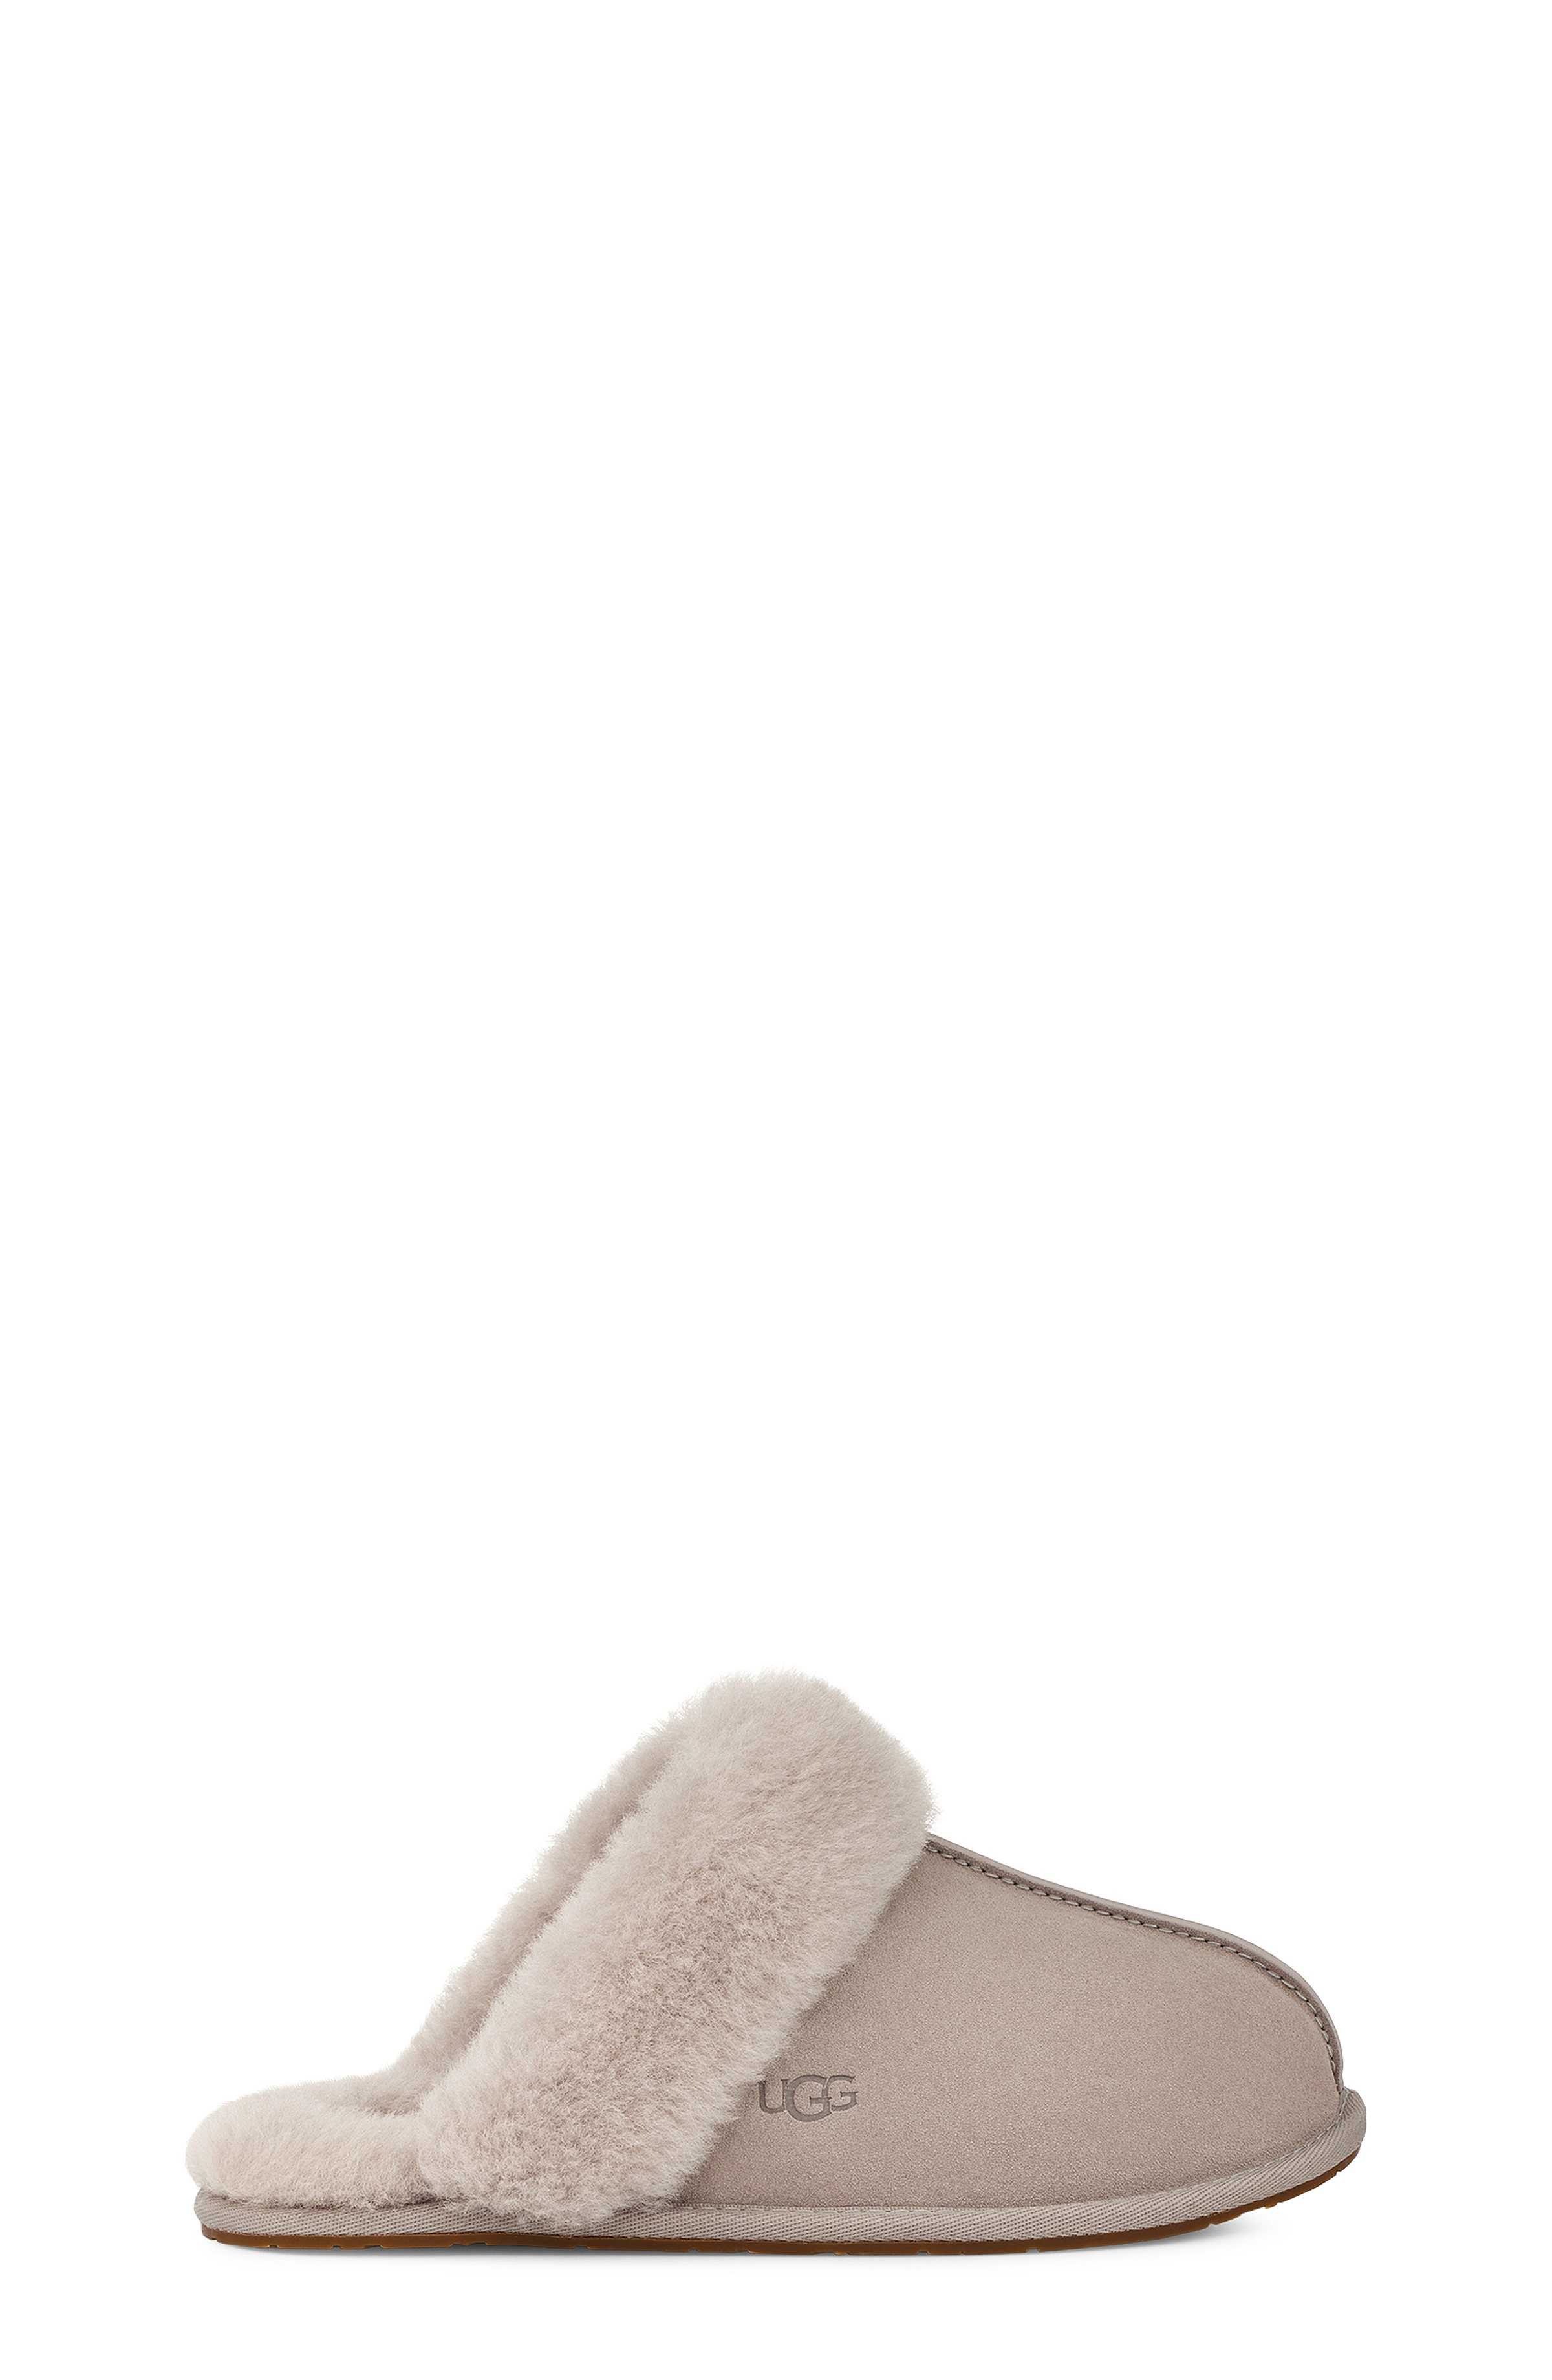 Scuffette Ii | UGG Outlet